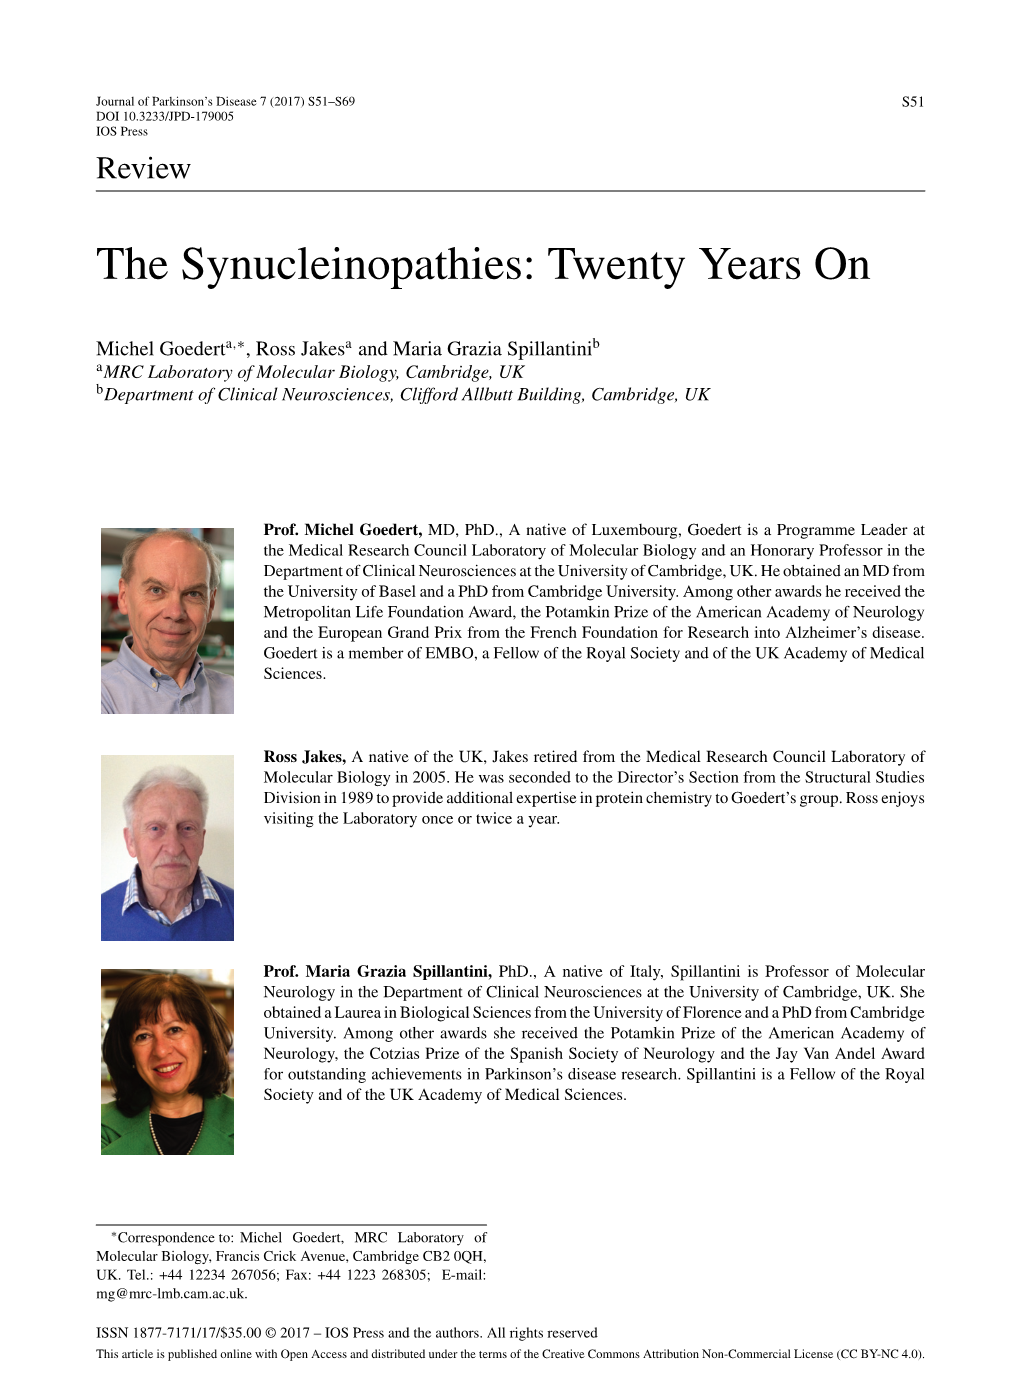 The Synucleinopathies: Twenty Years On